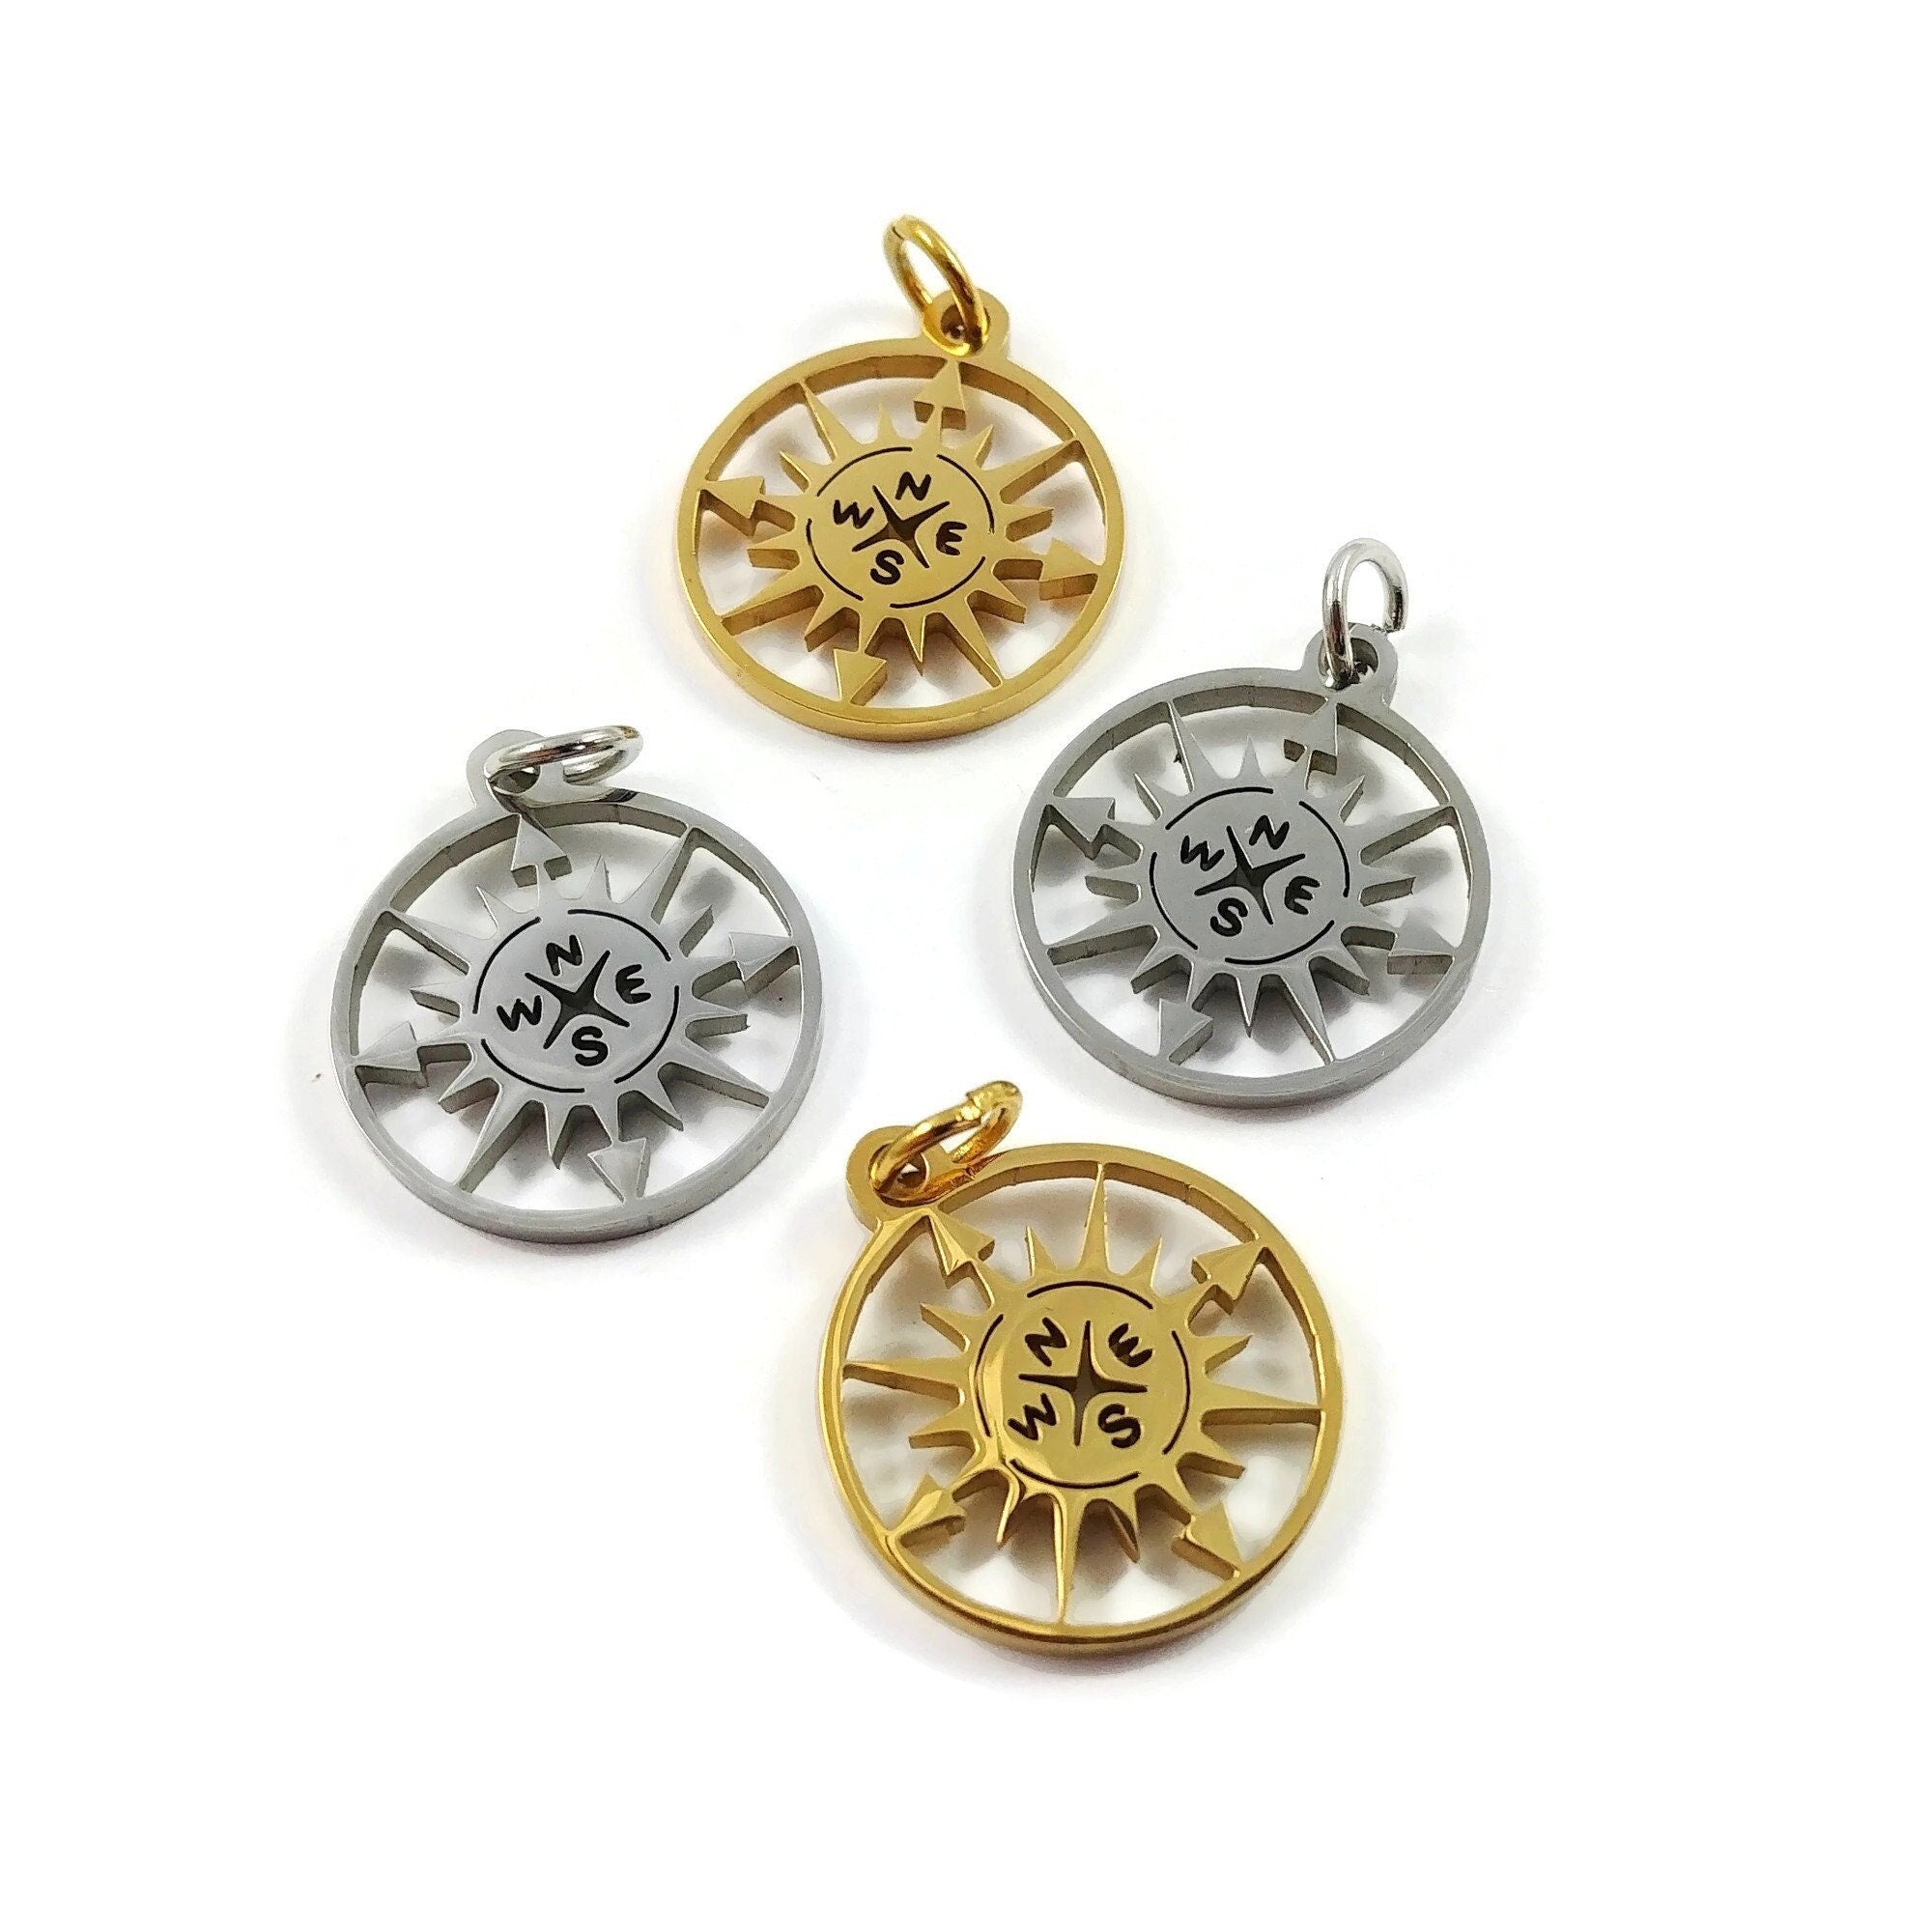 Compass rose charm, Stainless steel DIY necklace pendant, Travel nautical pendant, gold silver plated charms